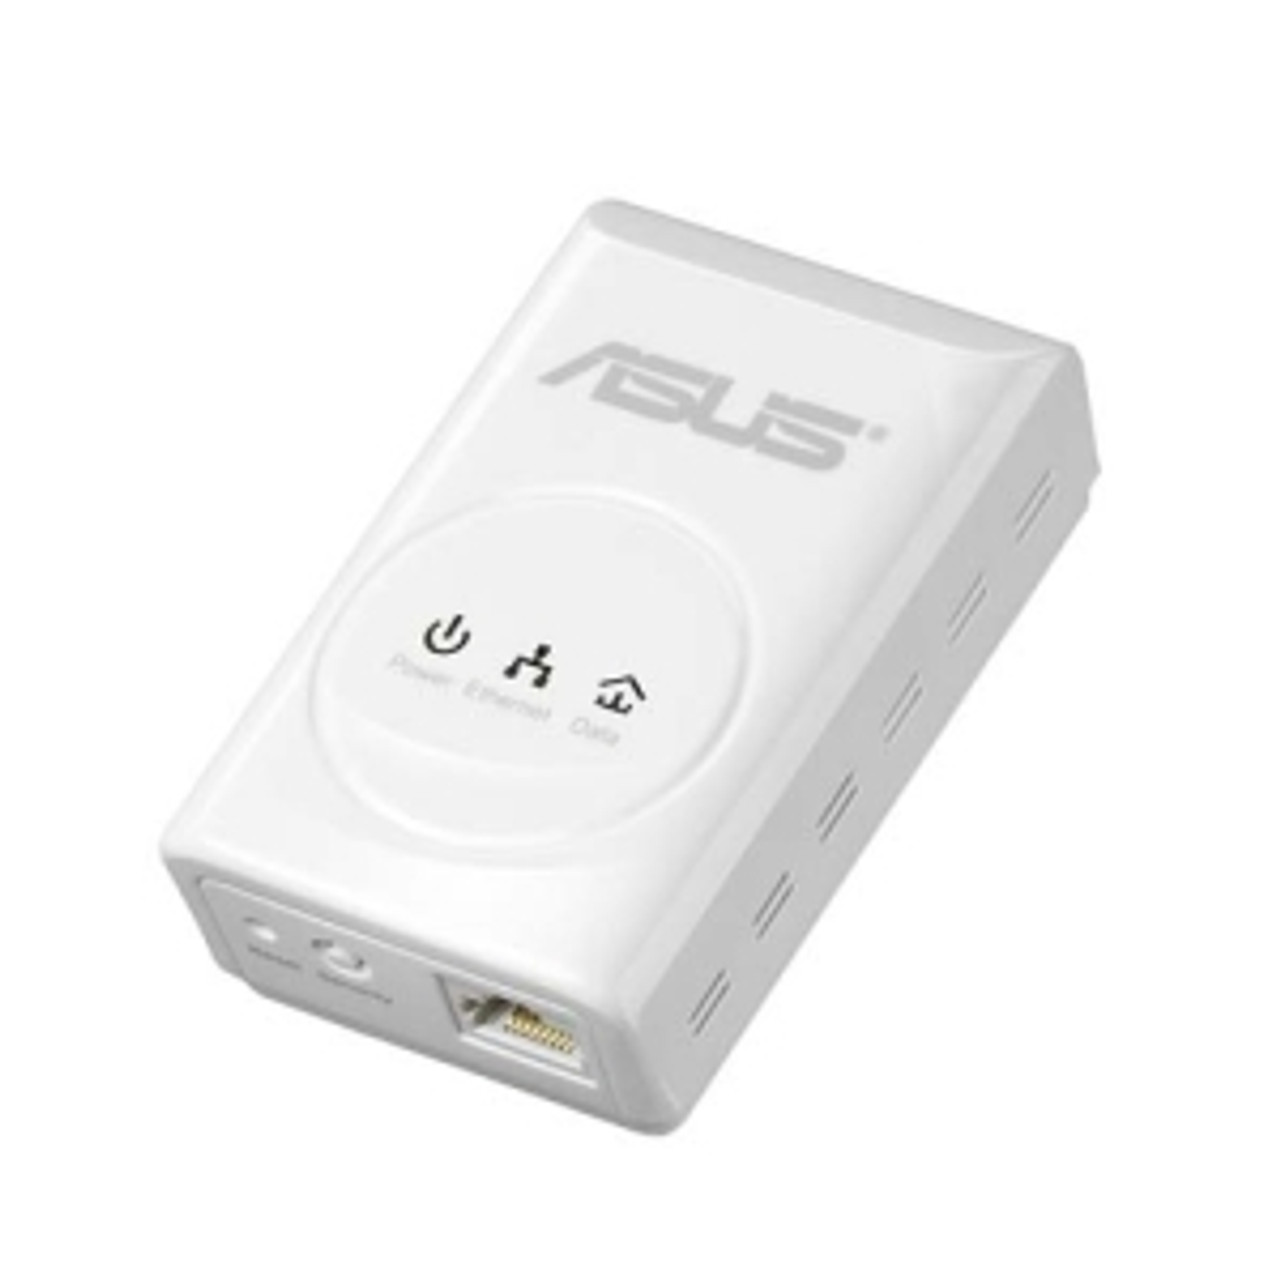 PL-X31M/G/US Asus PL-X31M Powerline Network Adapter 1 x Network